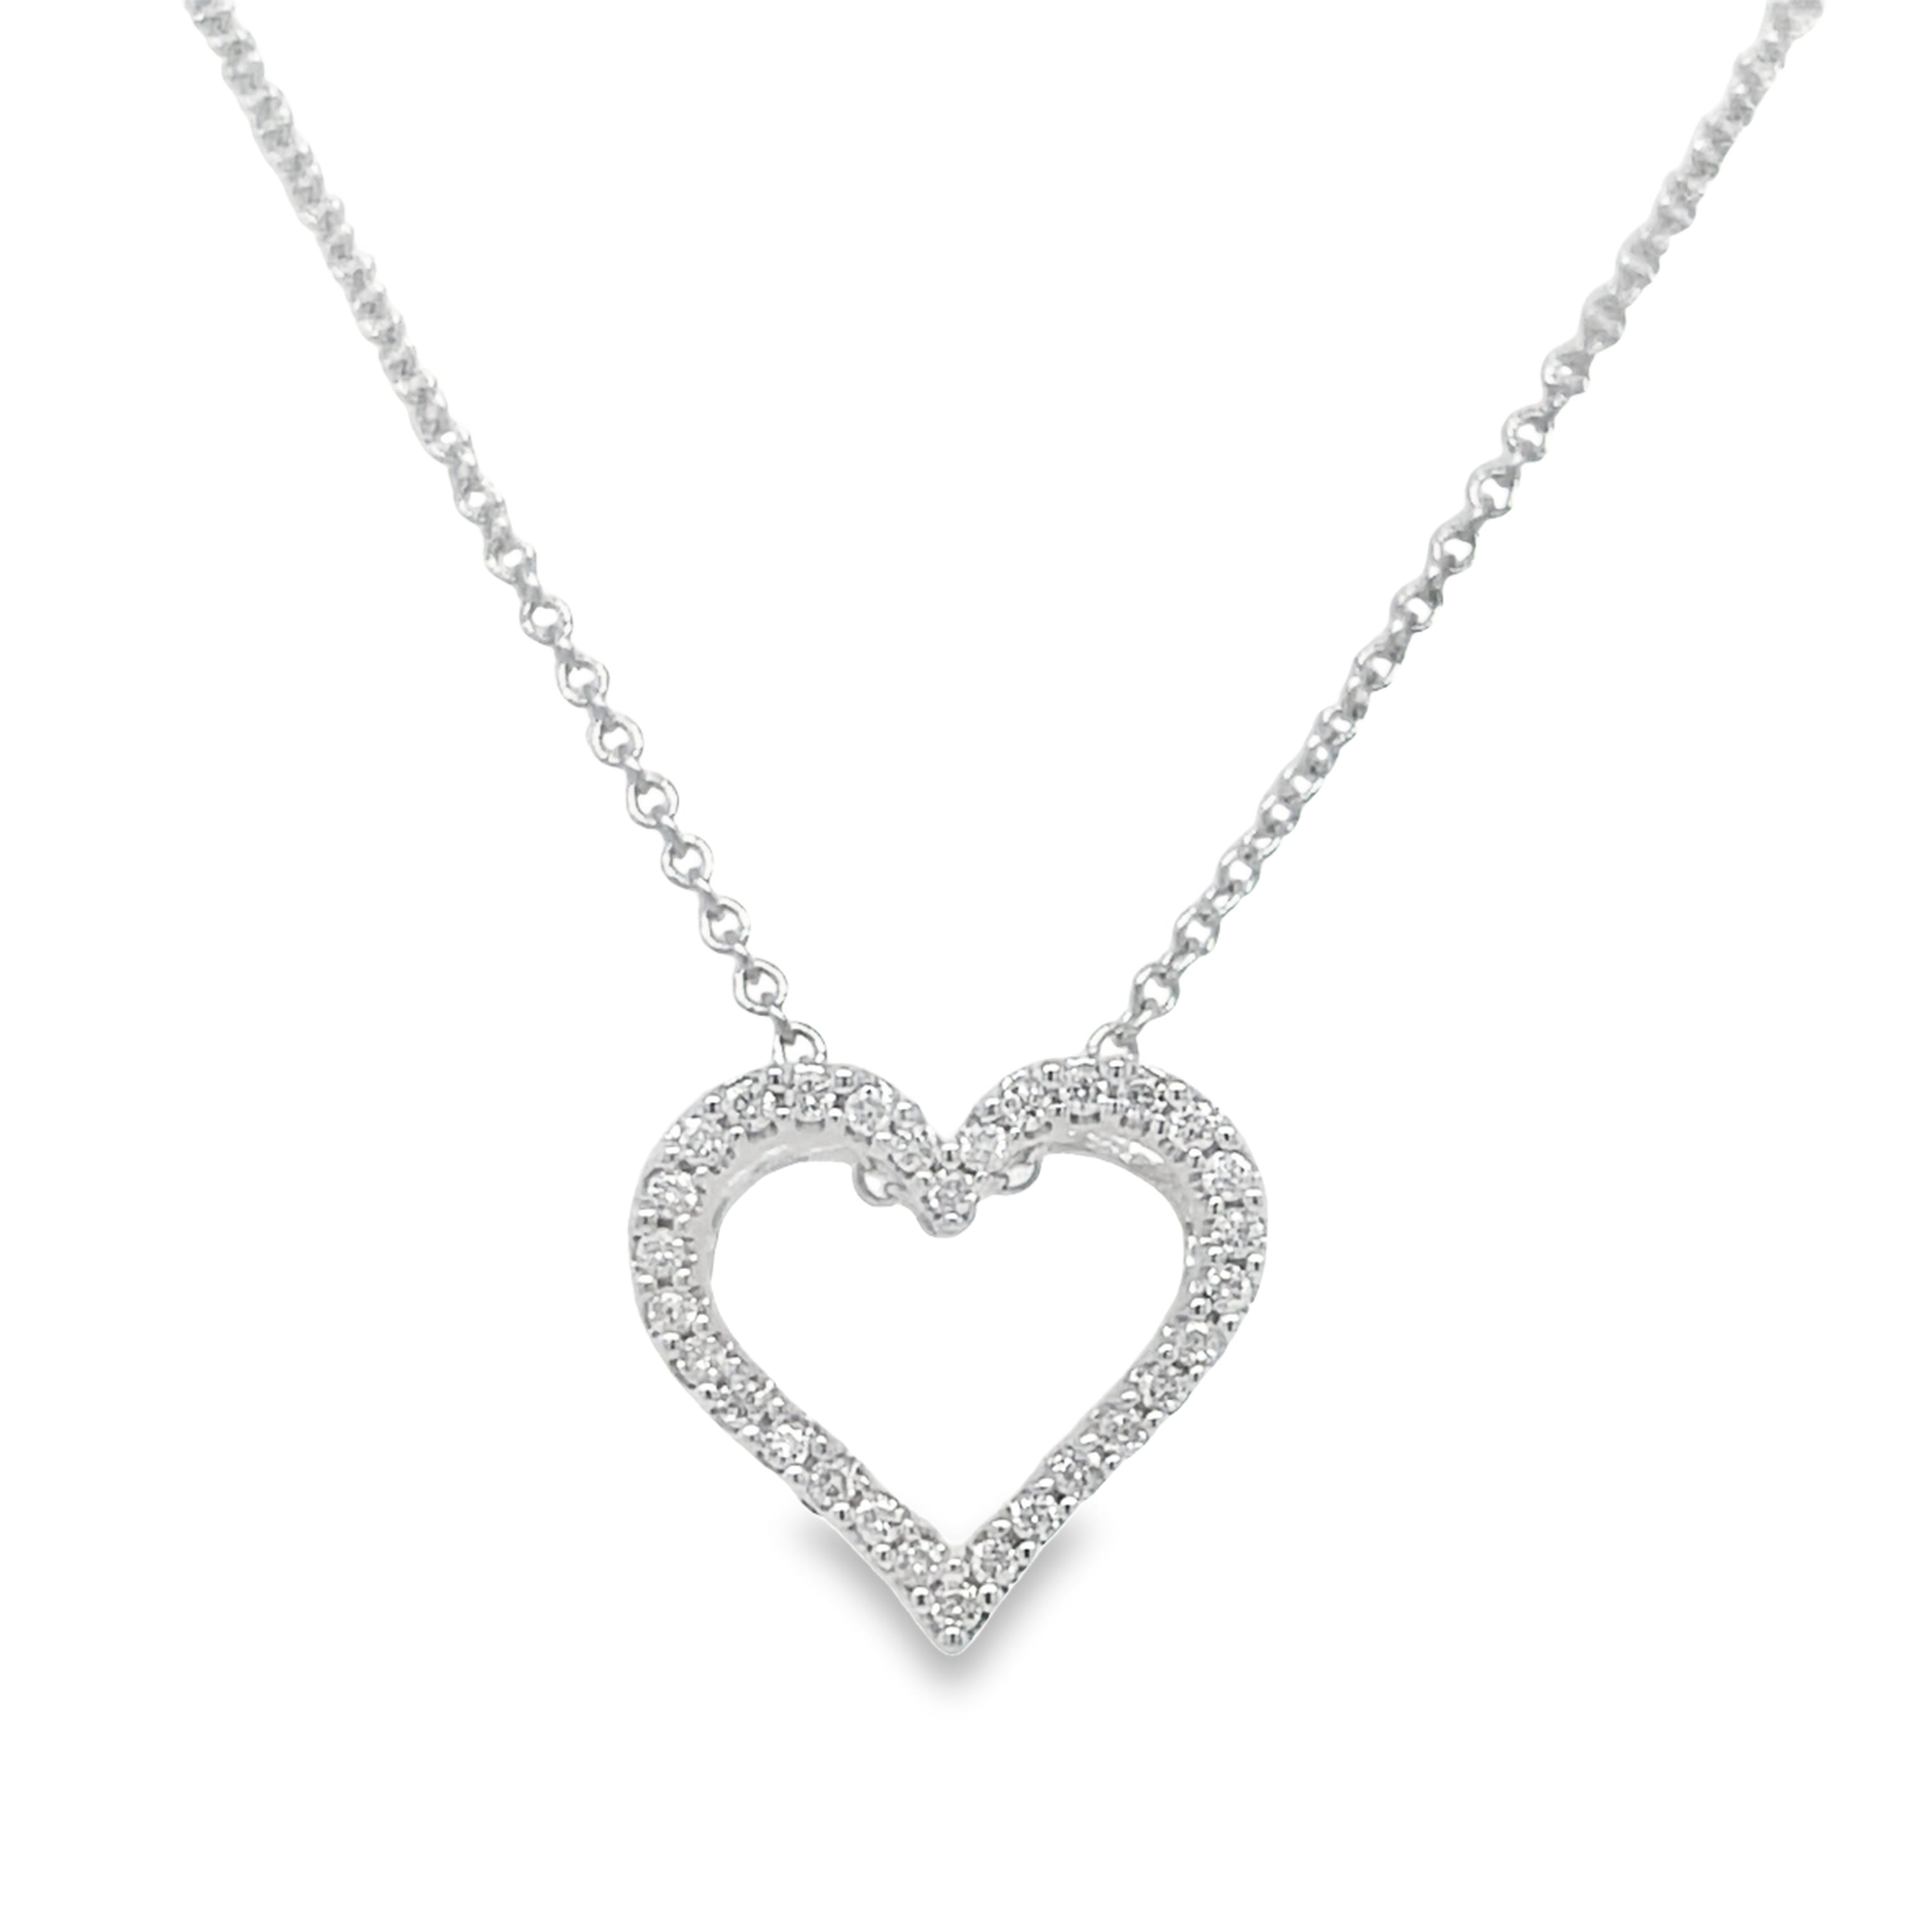 Express your love with this stunning Cut Out Heart Diamond Pendant Necklace. Made with 18k white gold, this pendant features a heart shape cut out and 0.11 cts of round diamonds. The secure lobster clasp and slide system makes it easy to wear, while the 18" white gold chain adds the perfect touch of elegance.